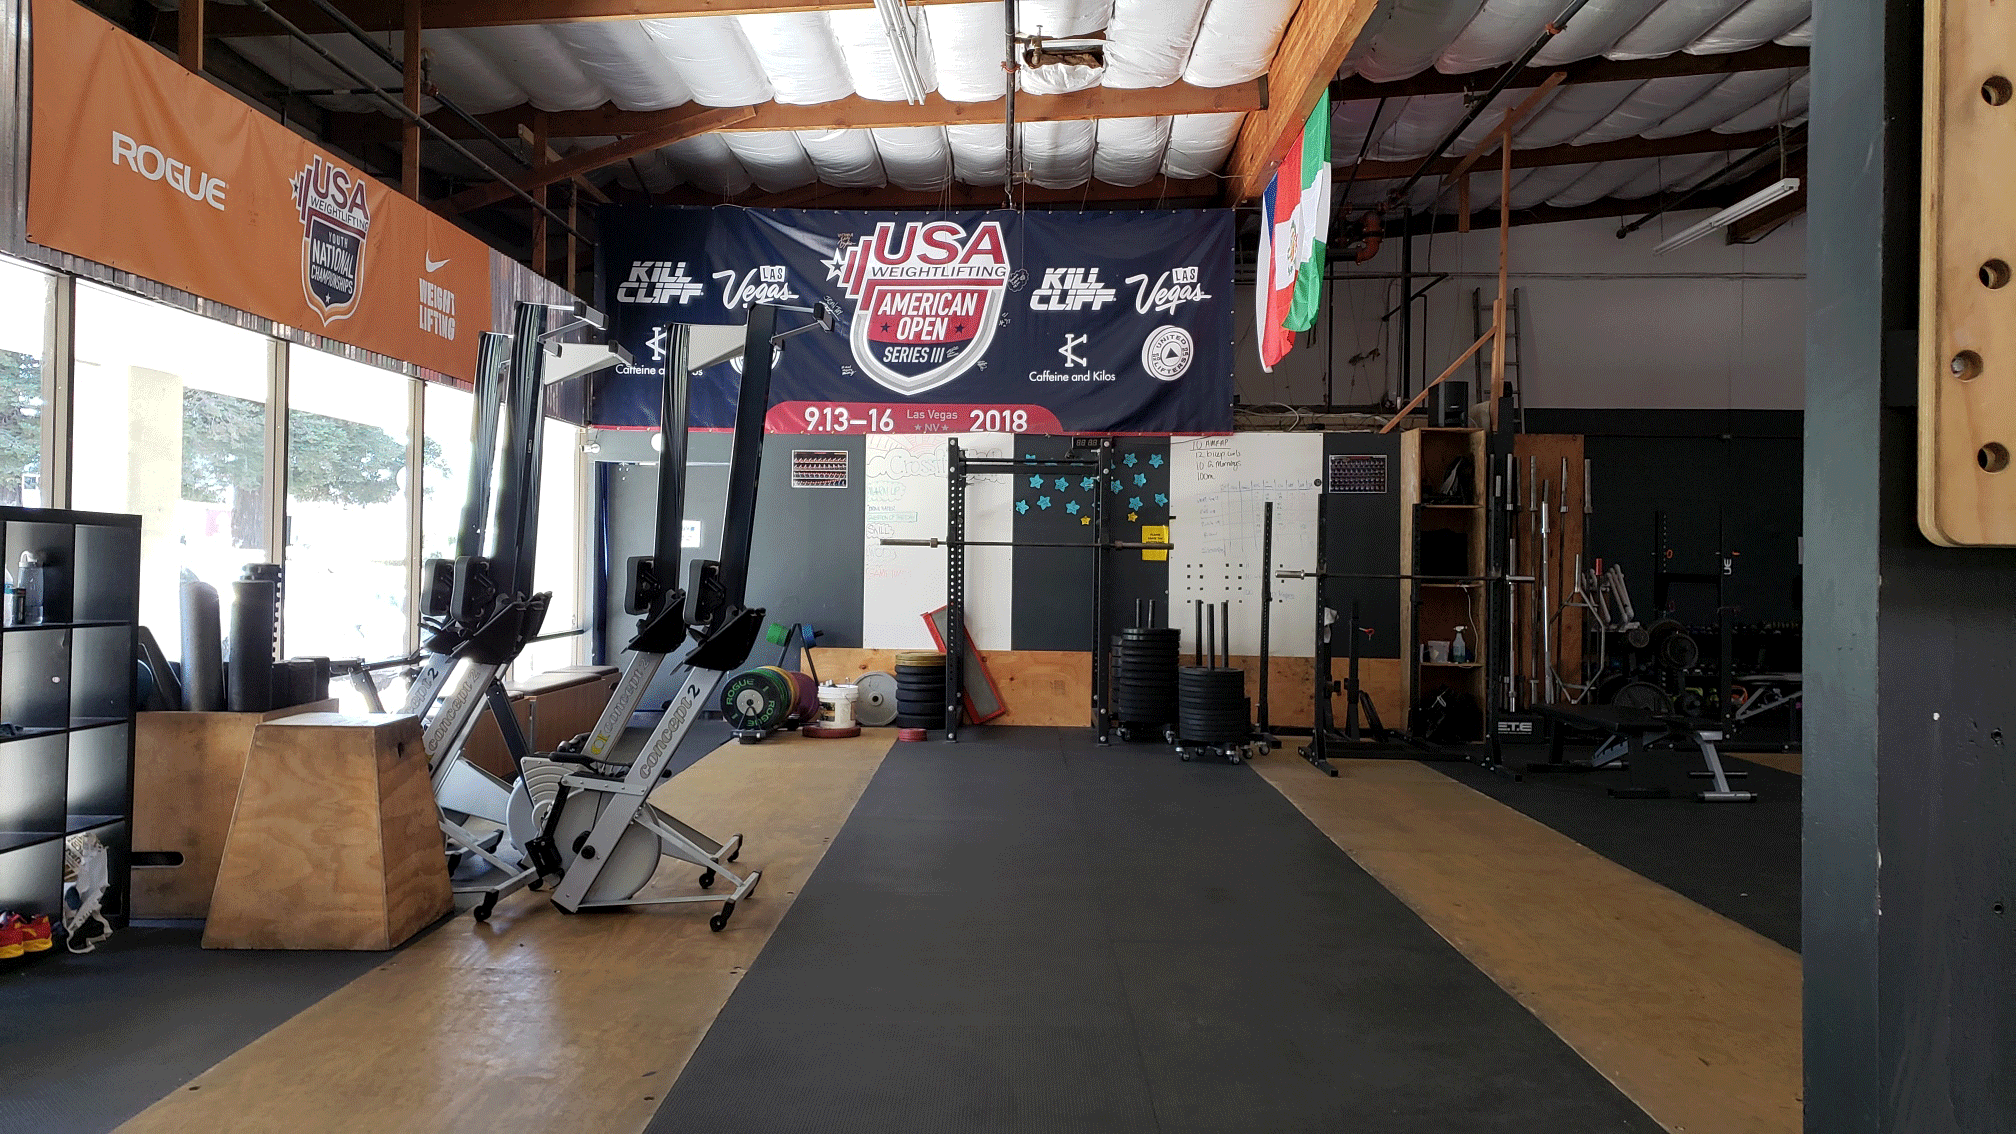 CWWM (Come Workout With Me) at one of the best Crossfit studios at